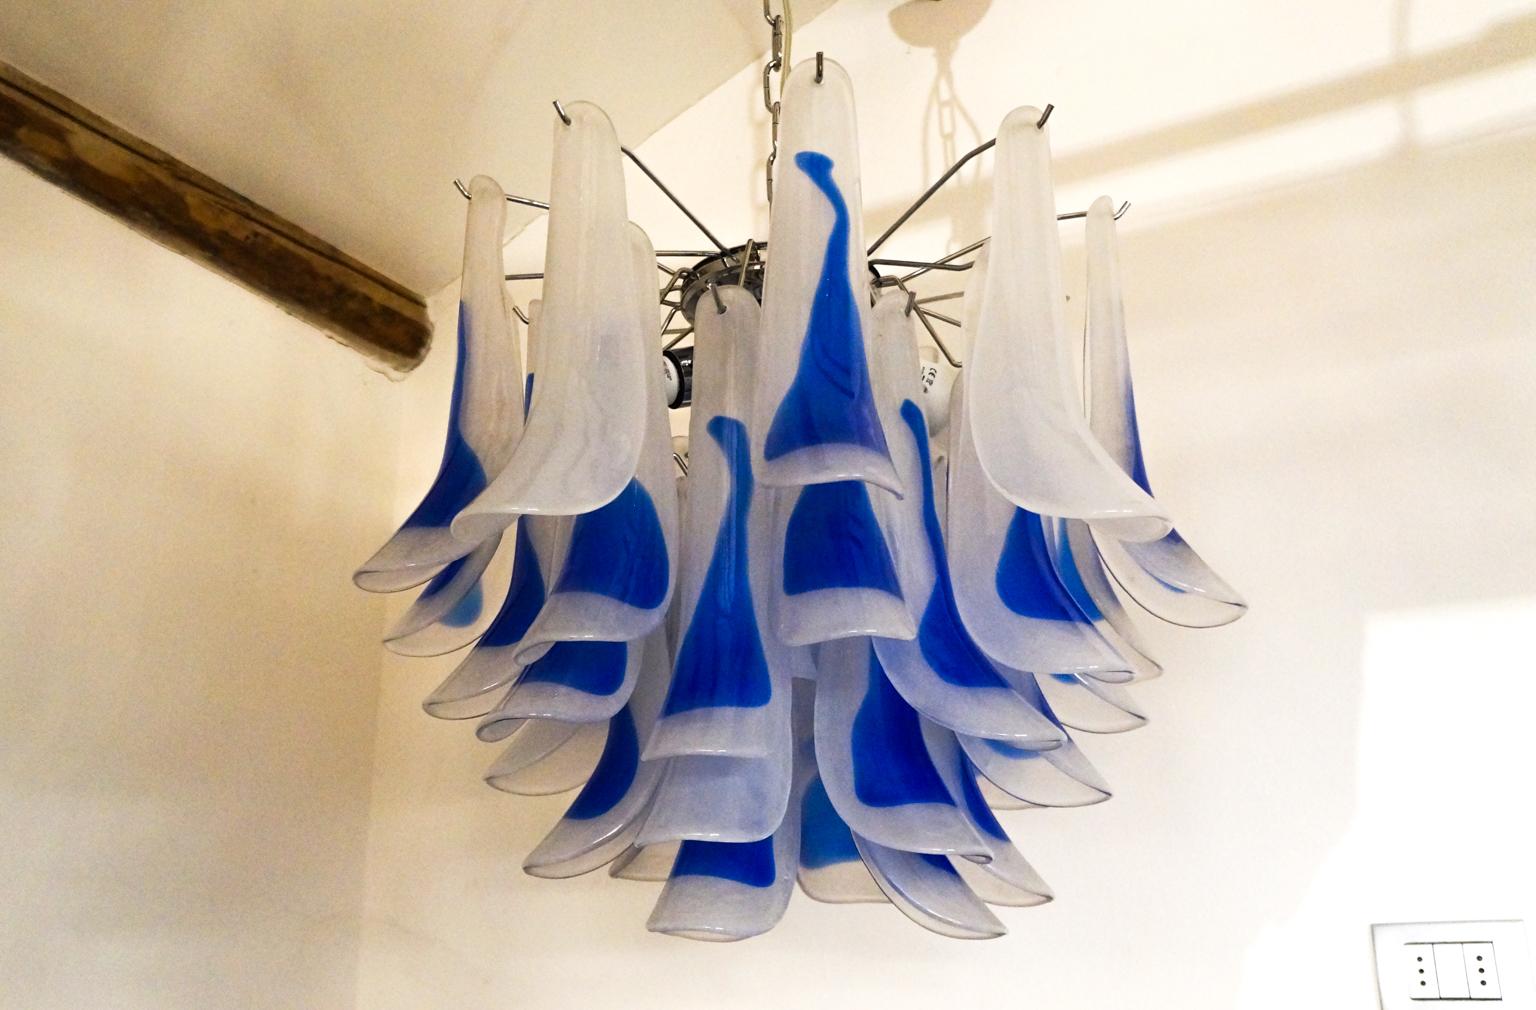 Alberto Donà Mid-Century Modern Crystal Blue Murano Glass Selle Chandelier, 1992 For Sale 10